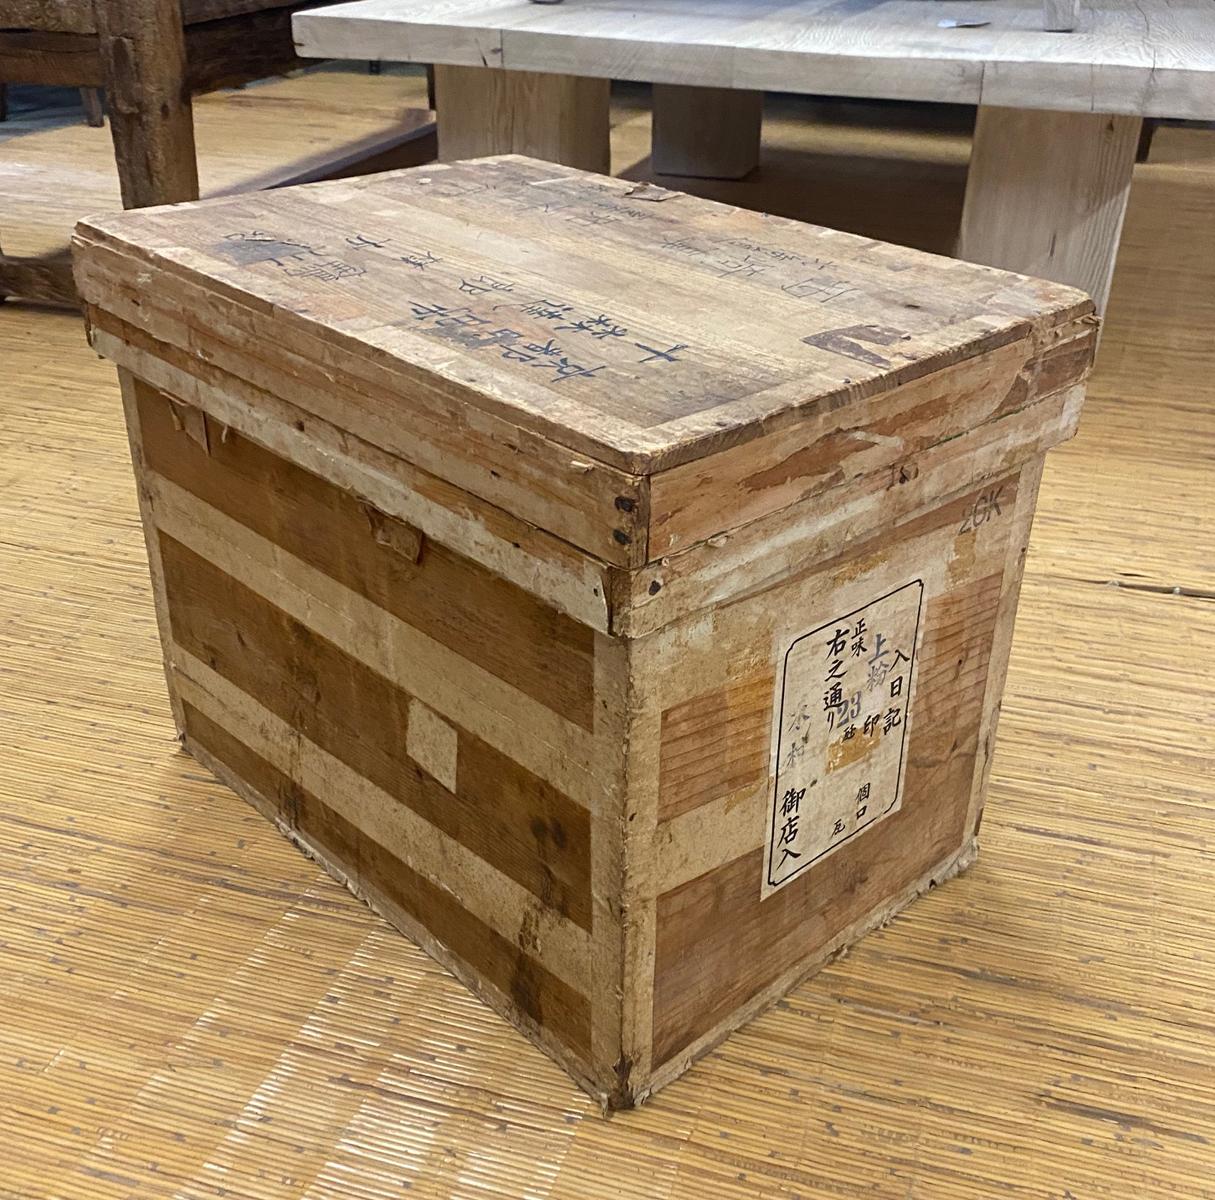 Smaller scale Japanese tin lined tea box. Stickers, labels and designs decorate the exterior. Lid fits perfectly. In very good condition. A great side table, small coffee table or storage box. Has a lot of character.